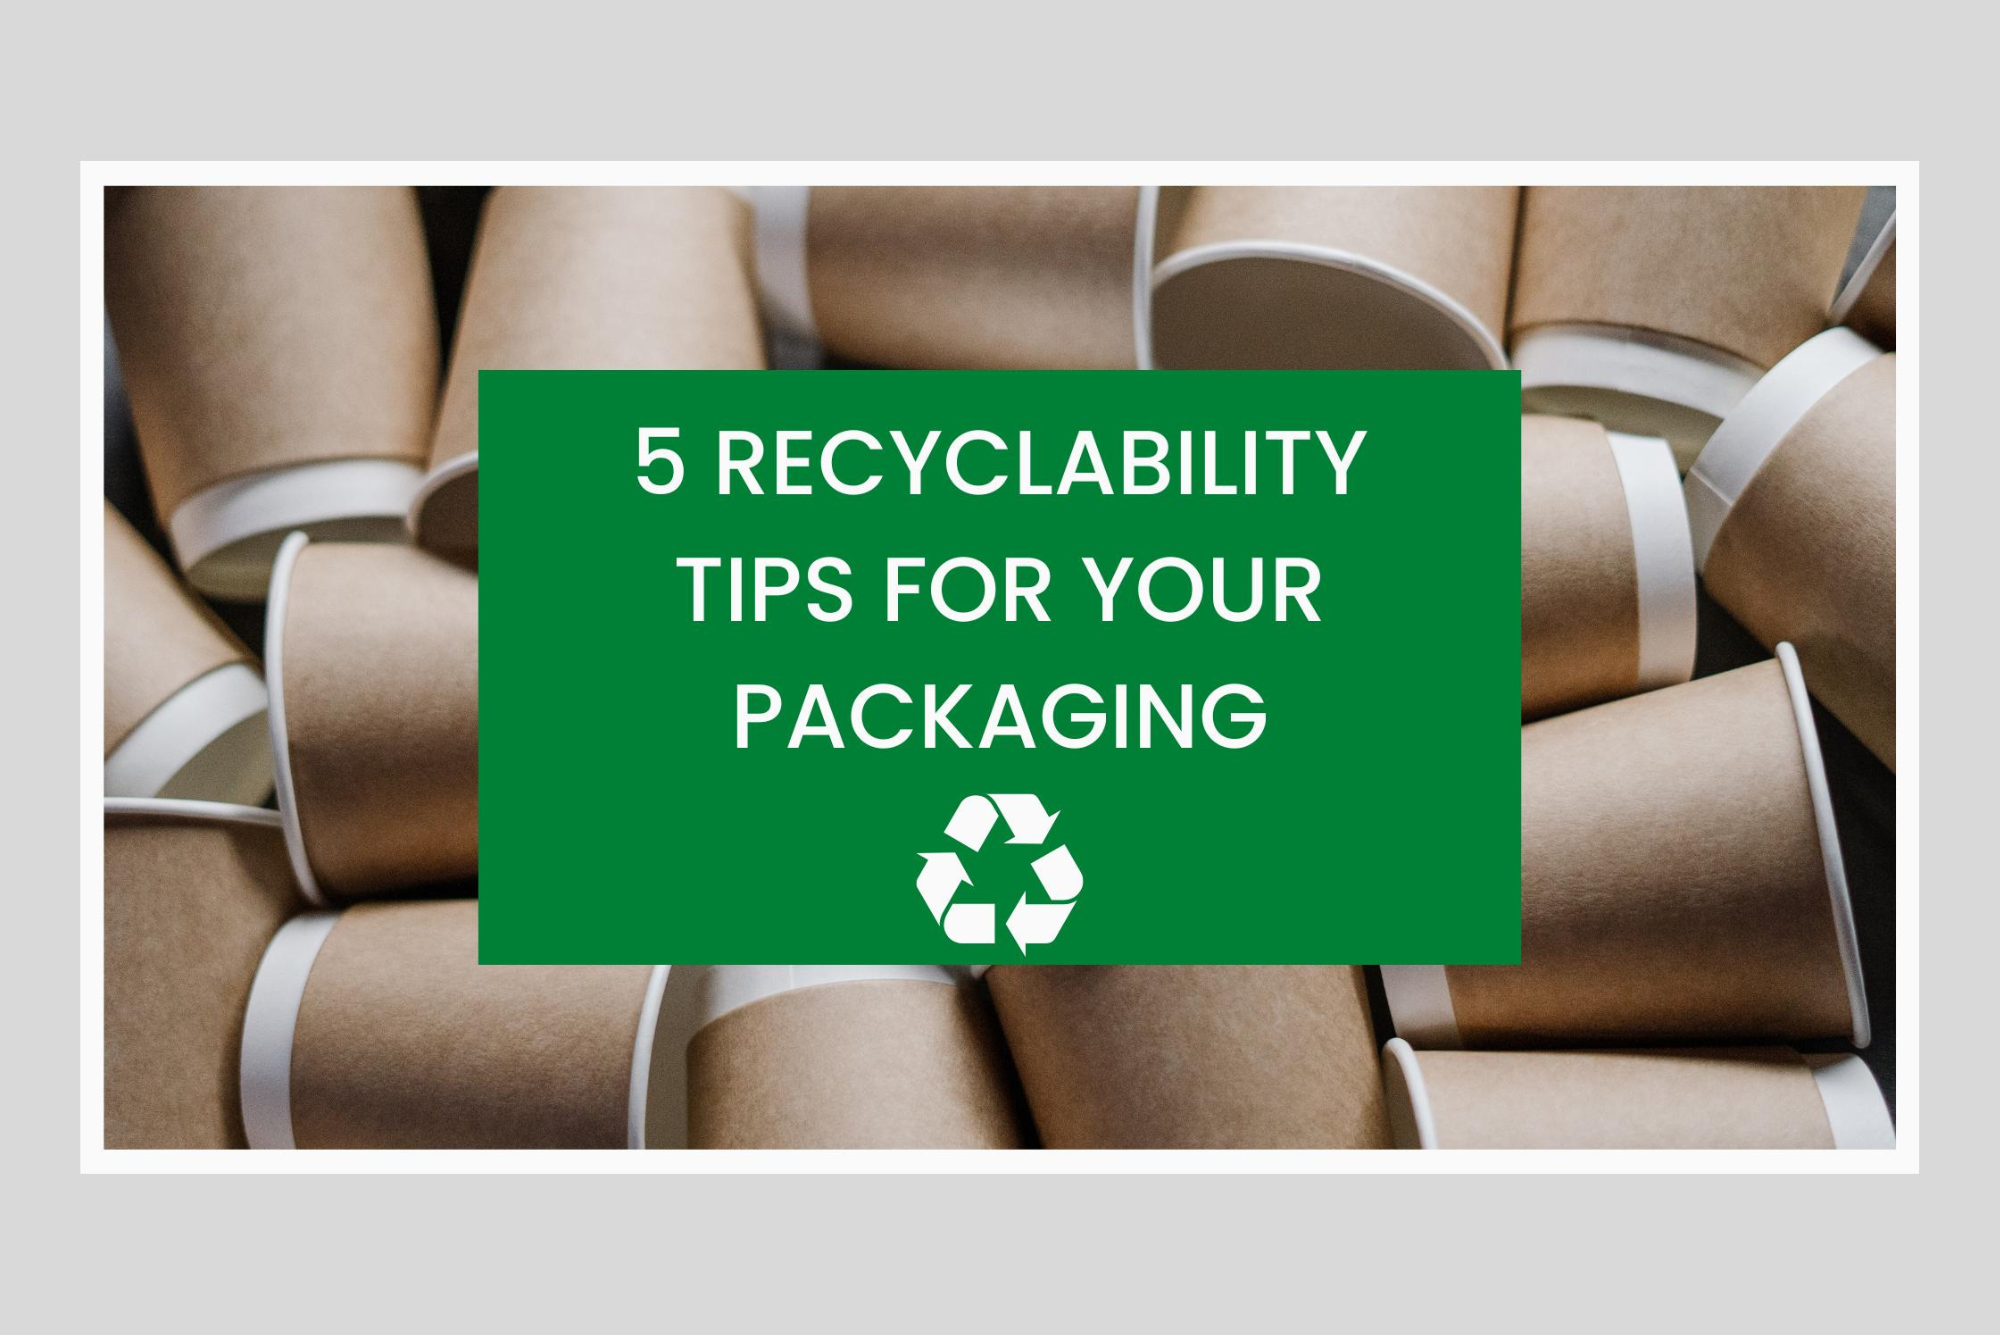 Go green with 5 recyclability tips for sustainable packaging. Discover strategies to reduce your environmental impact and make your packaging more eco-friendly. From choosing recyclable materials and optimizing packaging design to educating consumers, we’re including valuable insight to help your business embrace more eco-friendly packaging practices. 